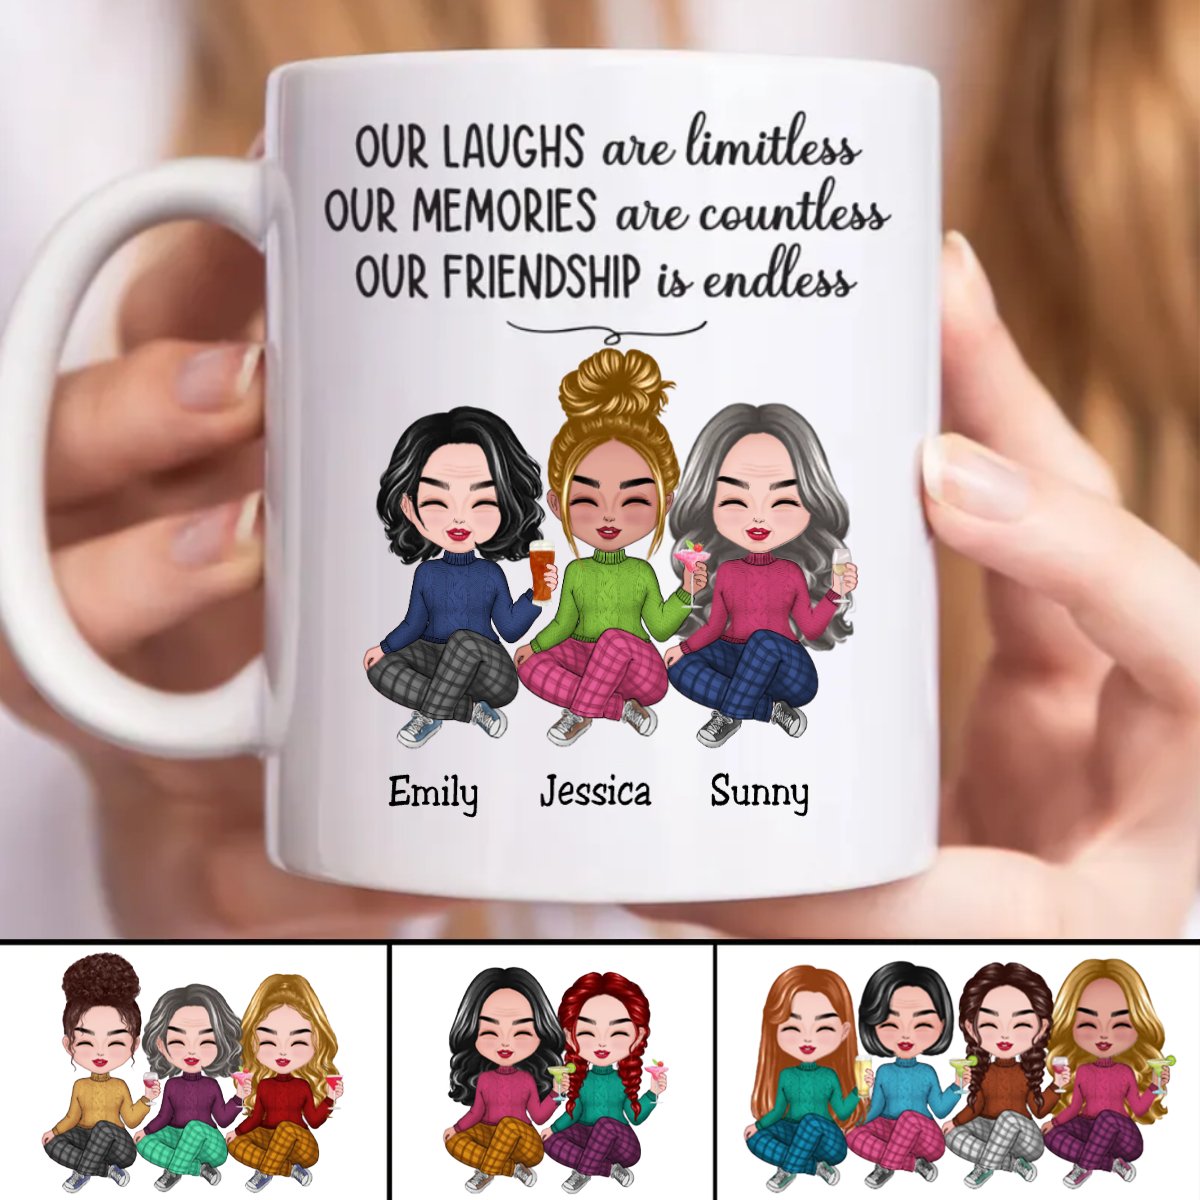 Our Laughs Are Limitless Our Memories Are Countless Our Friendship Is Endless - Personalized Mug (LH) - The Next Custom Gift